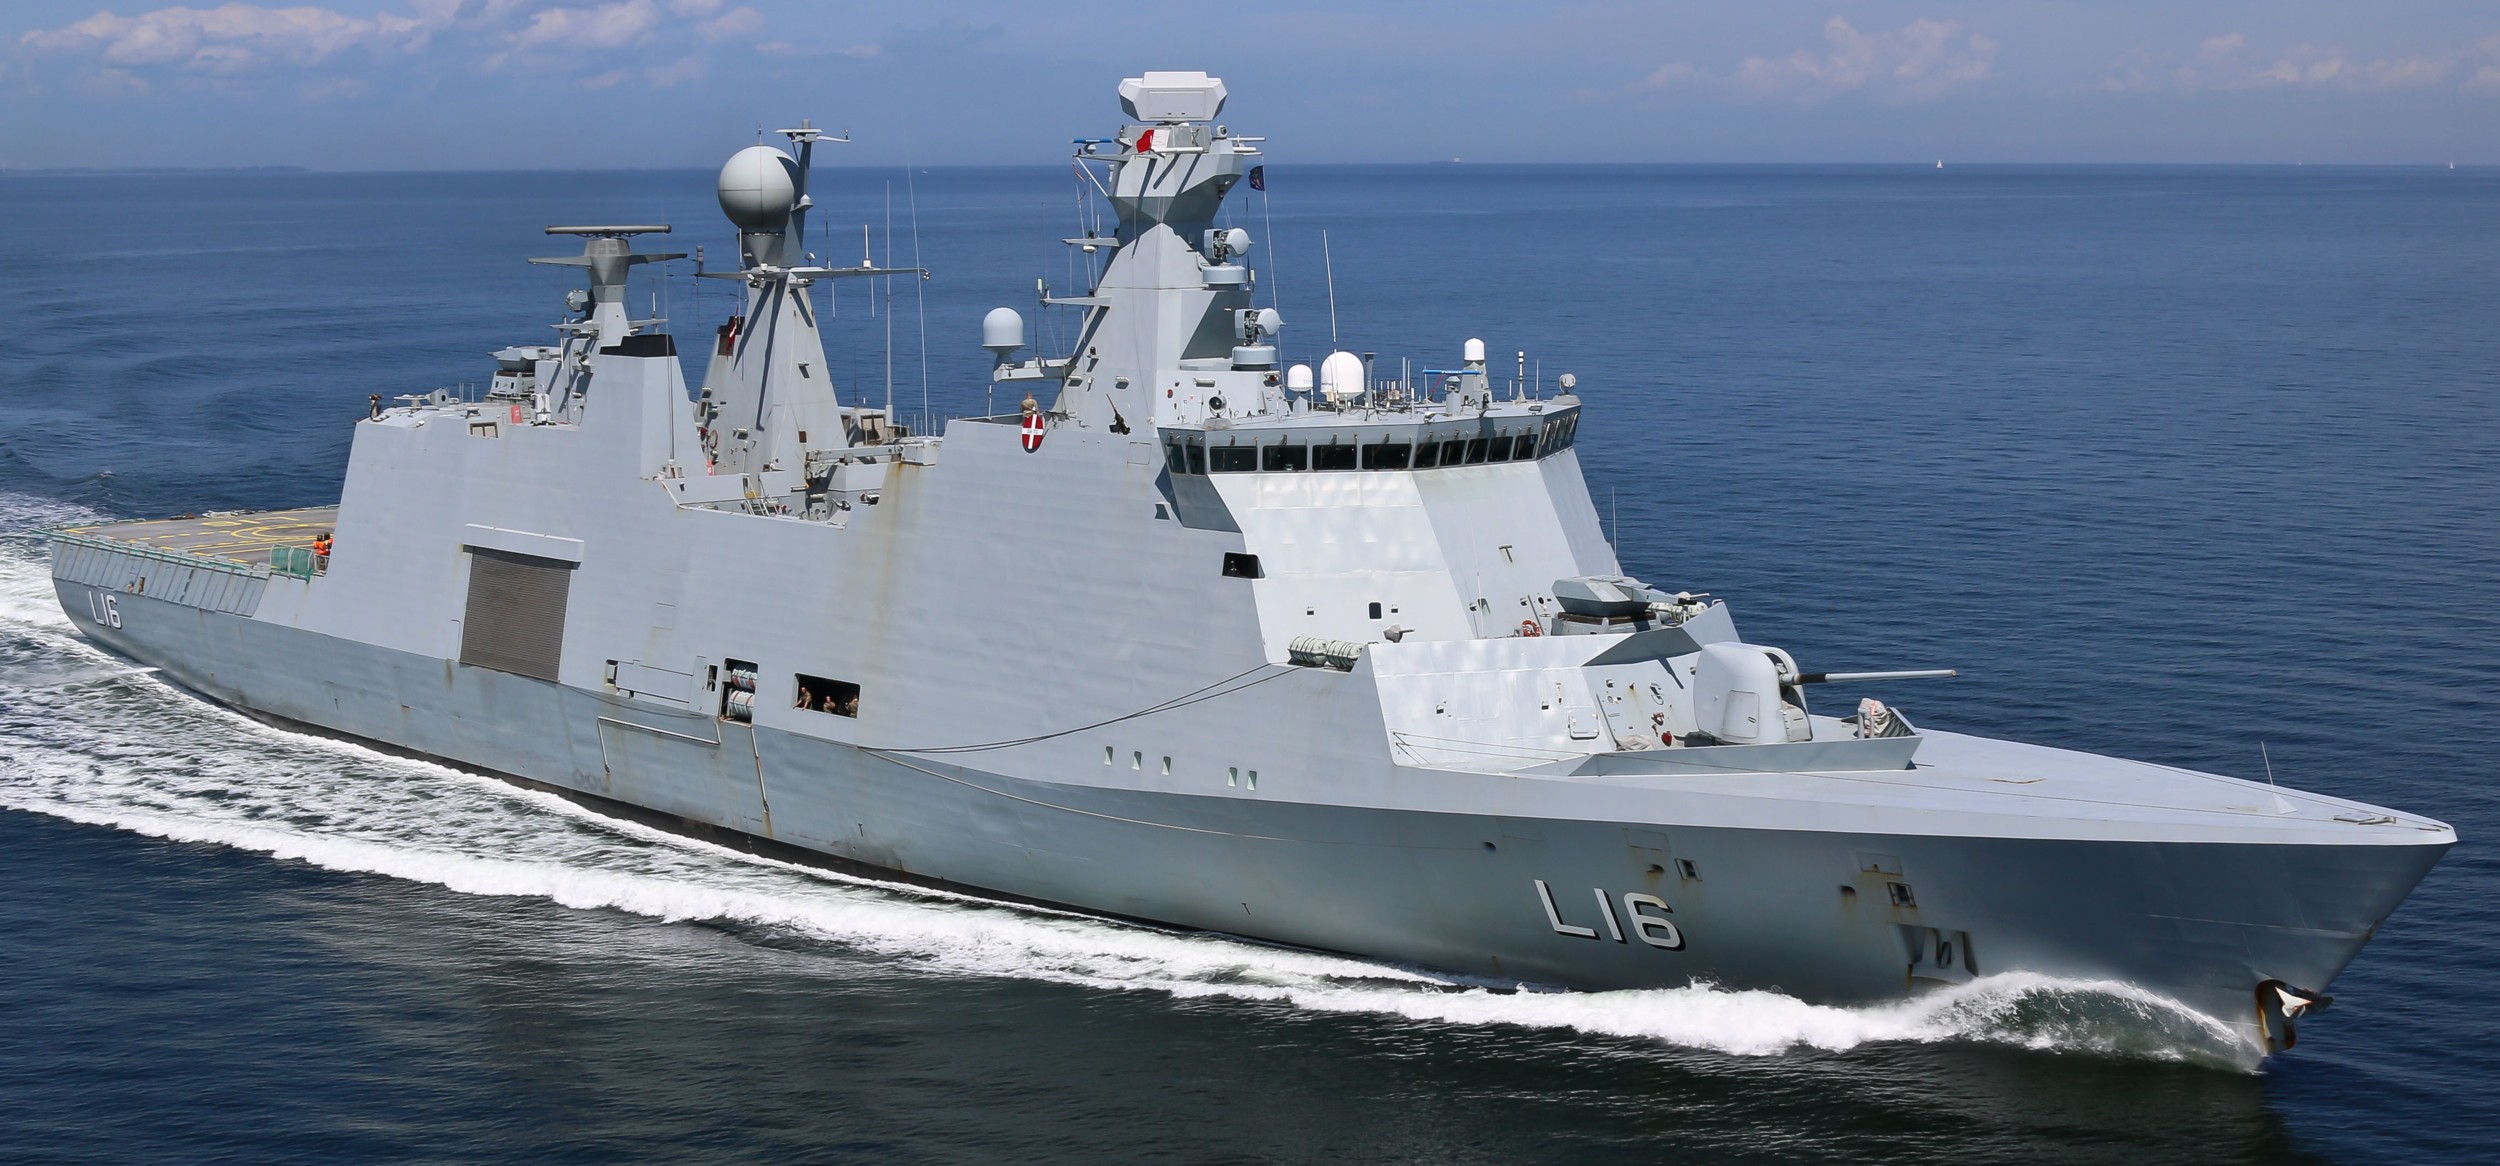 l-16 hdms absalon command support ship frigate royal danish navy 91